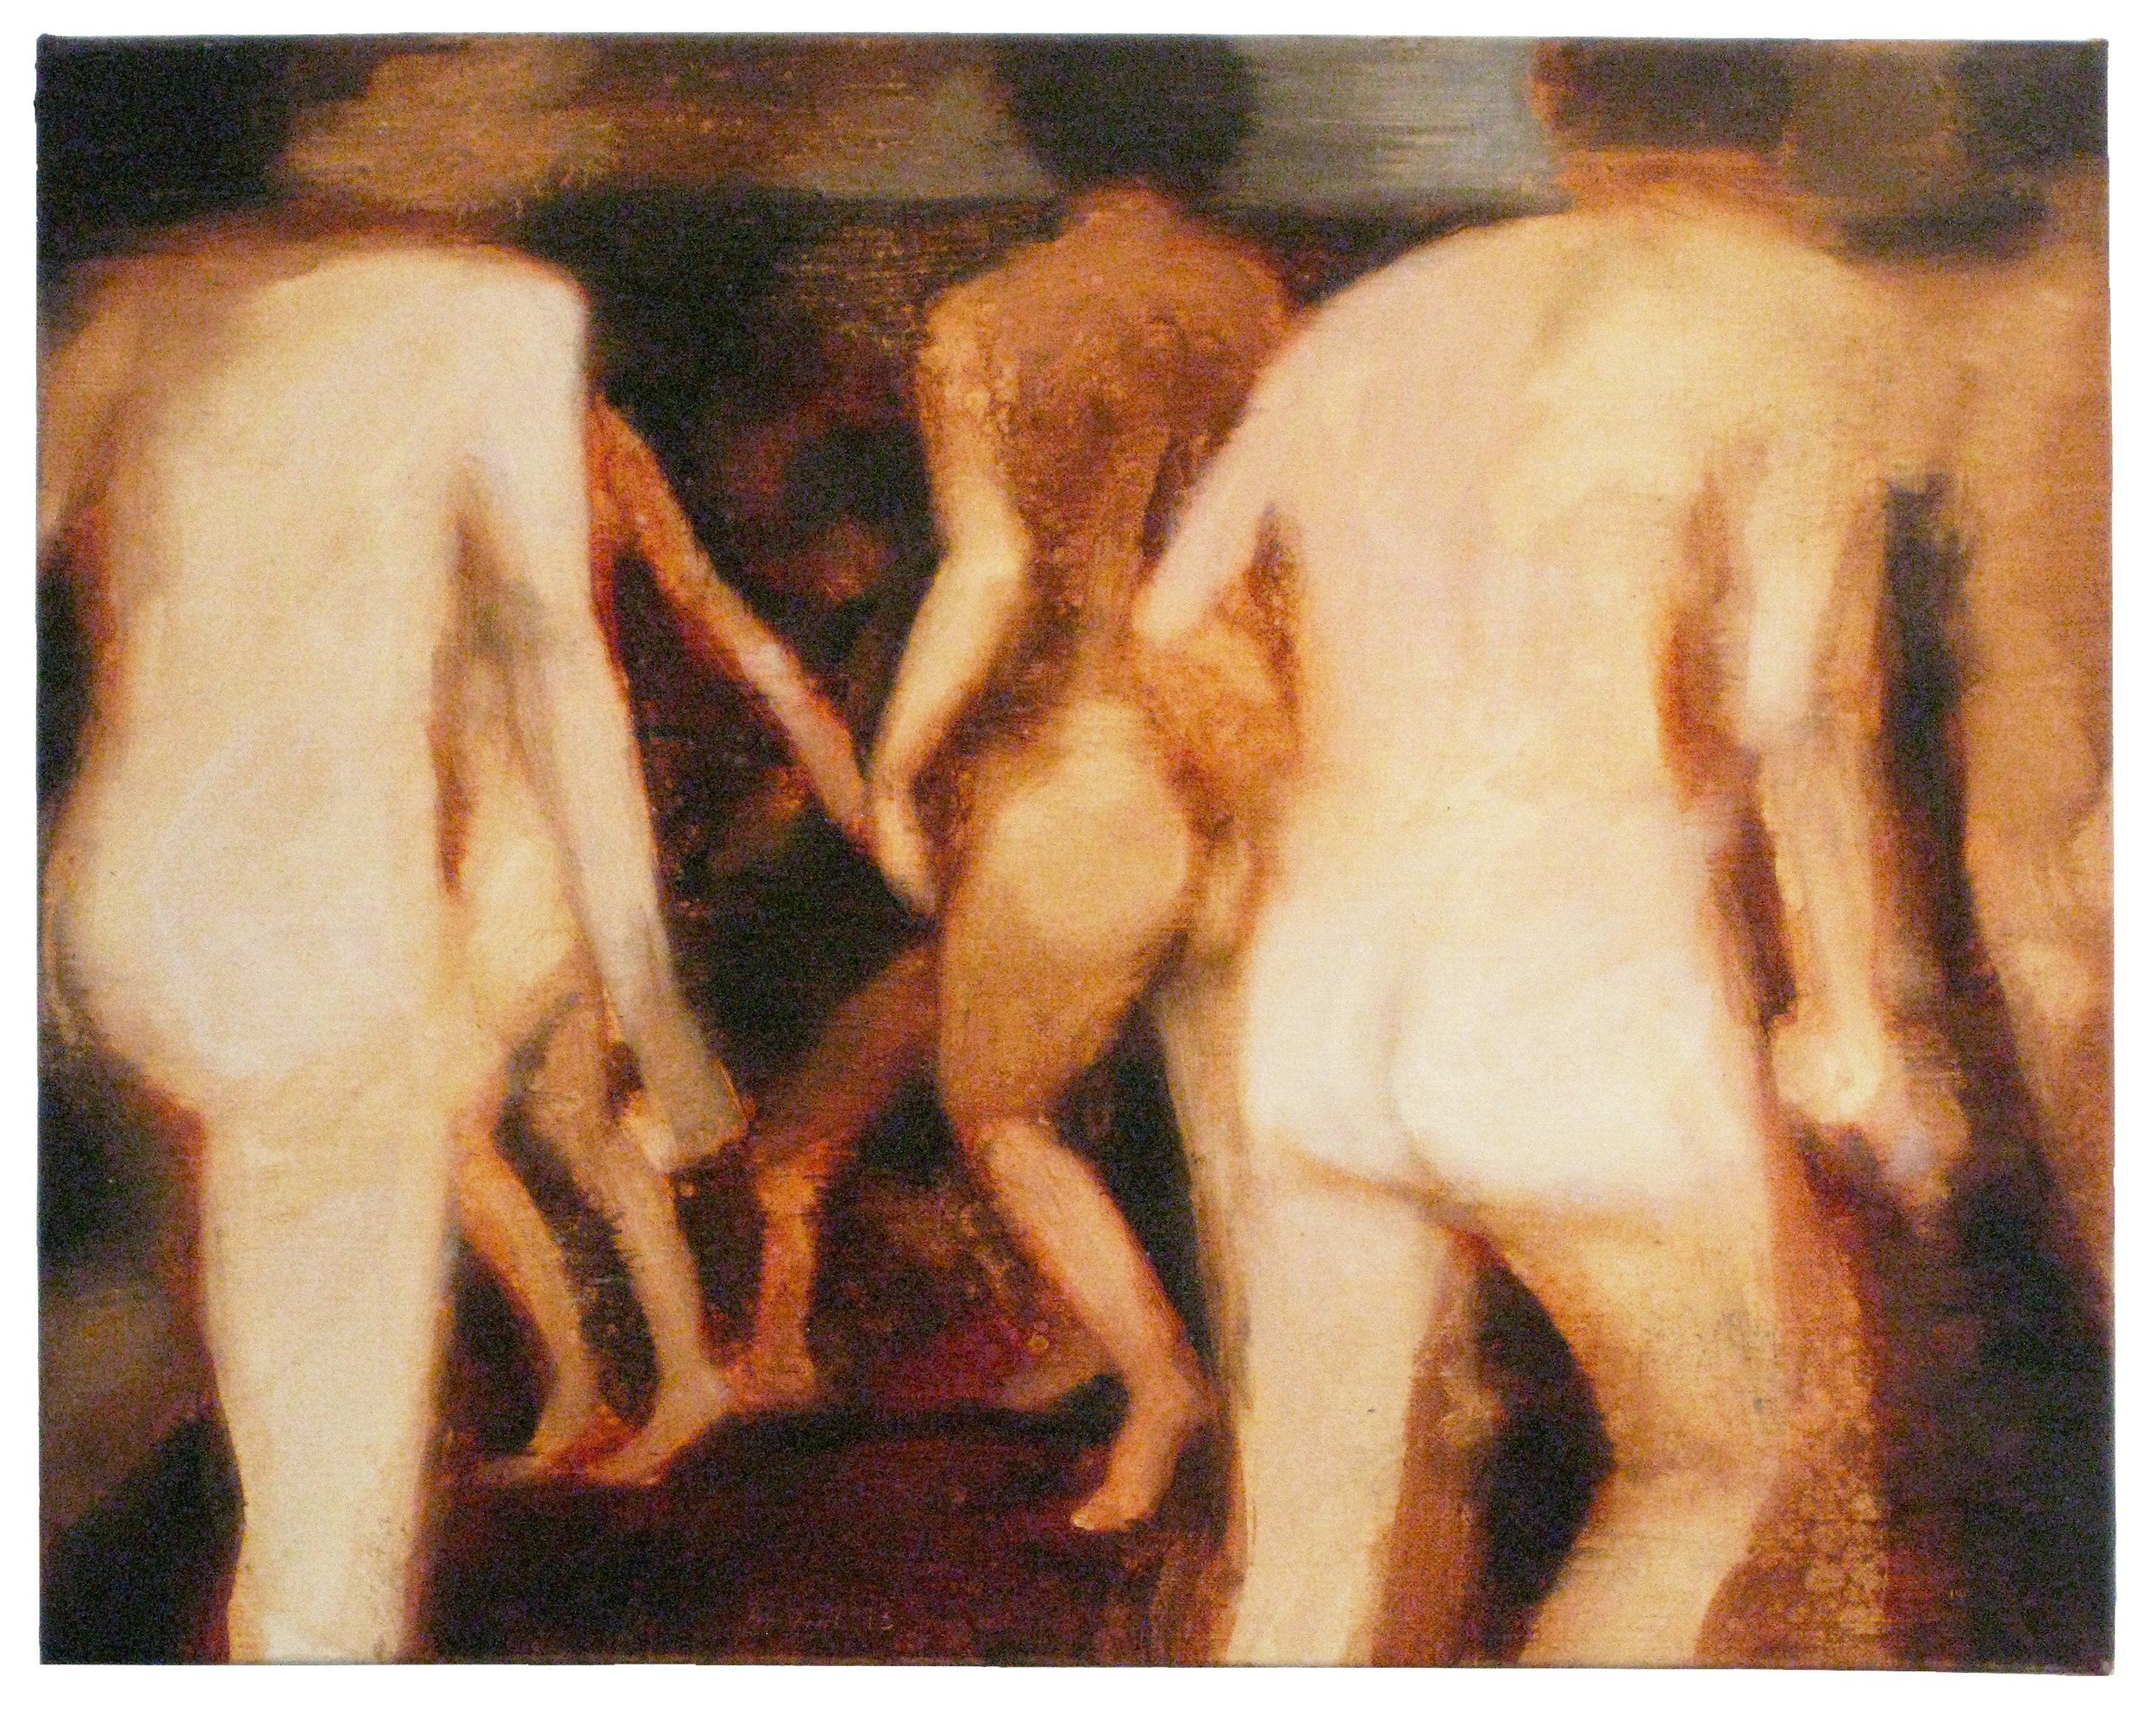  Dancers 2 11x14 inches (28x35.5 cm) Oil on linen 2014 